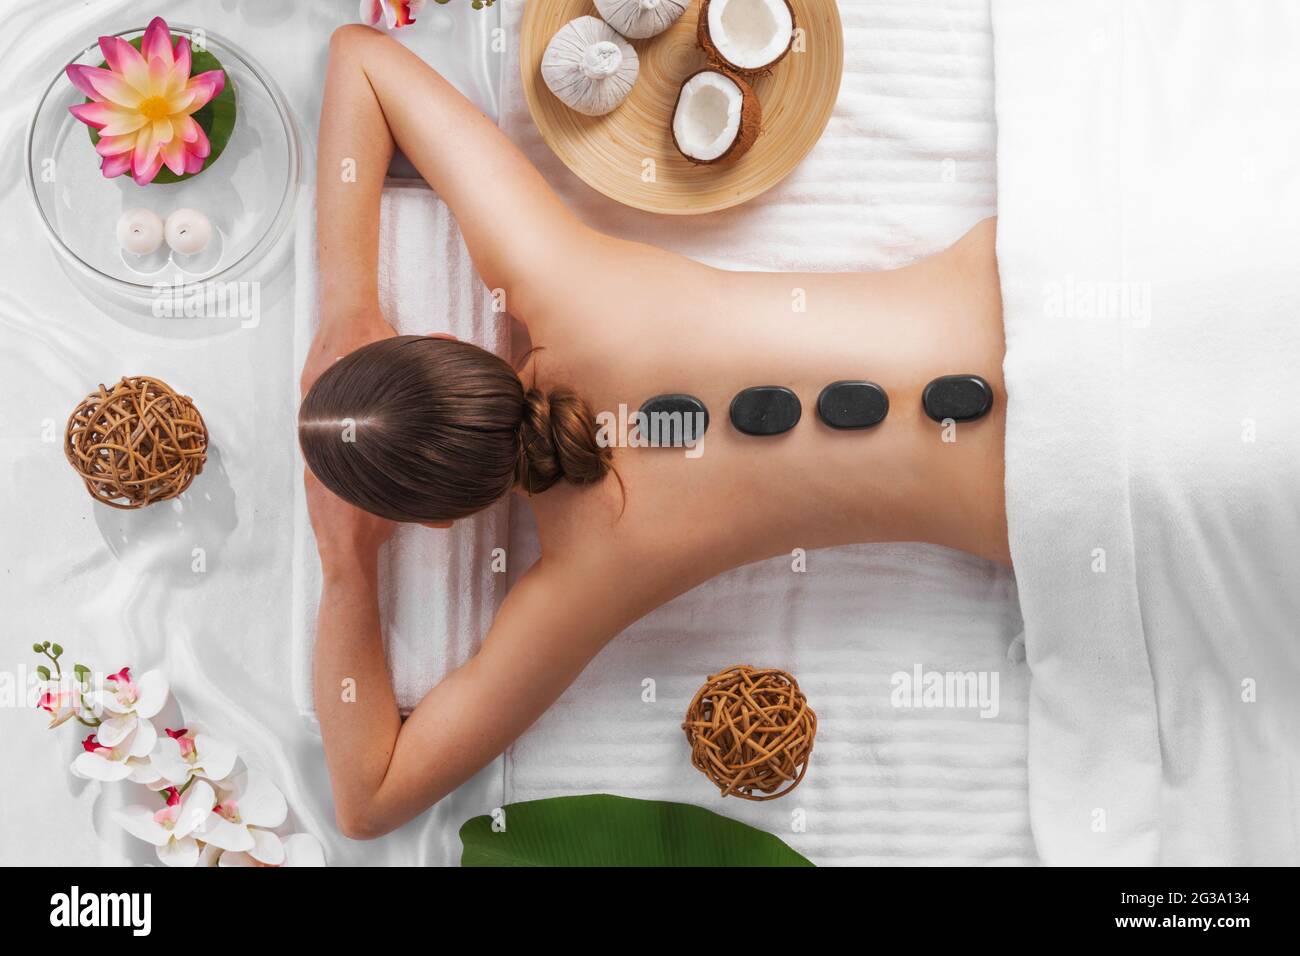 Spa stone massage, beautiful woman getting hot stones massage, beauty treatments concept. Top view. Orchid and lotus flowers coconut and herb pouches Stock Photo